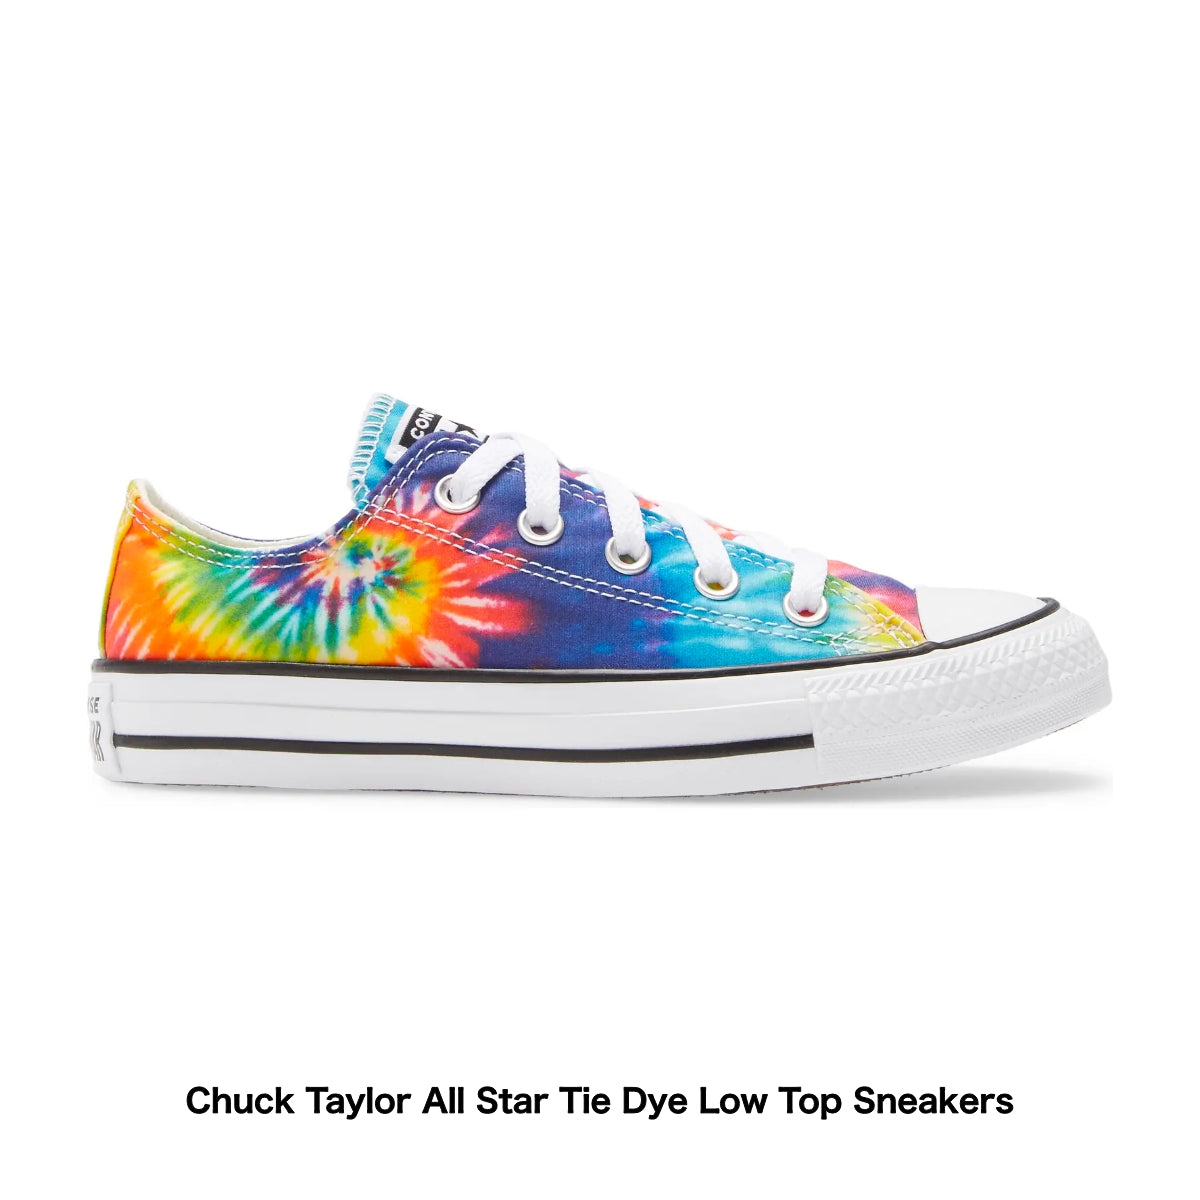 Chuck Taylor All Star Tie Dye Low Top Sneakers - Nordstrom